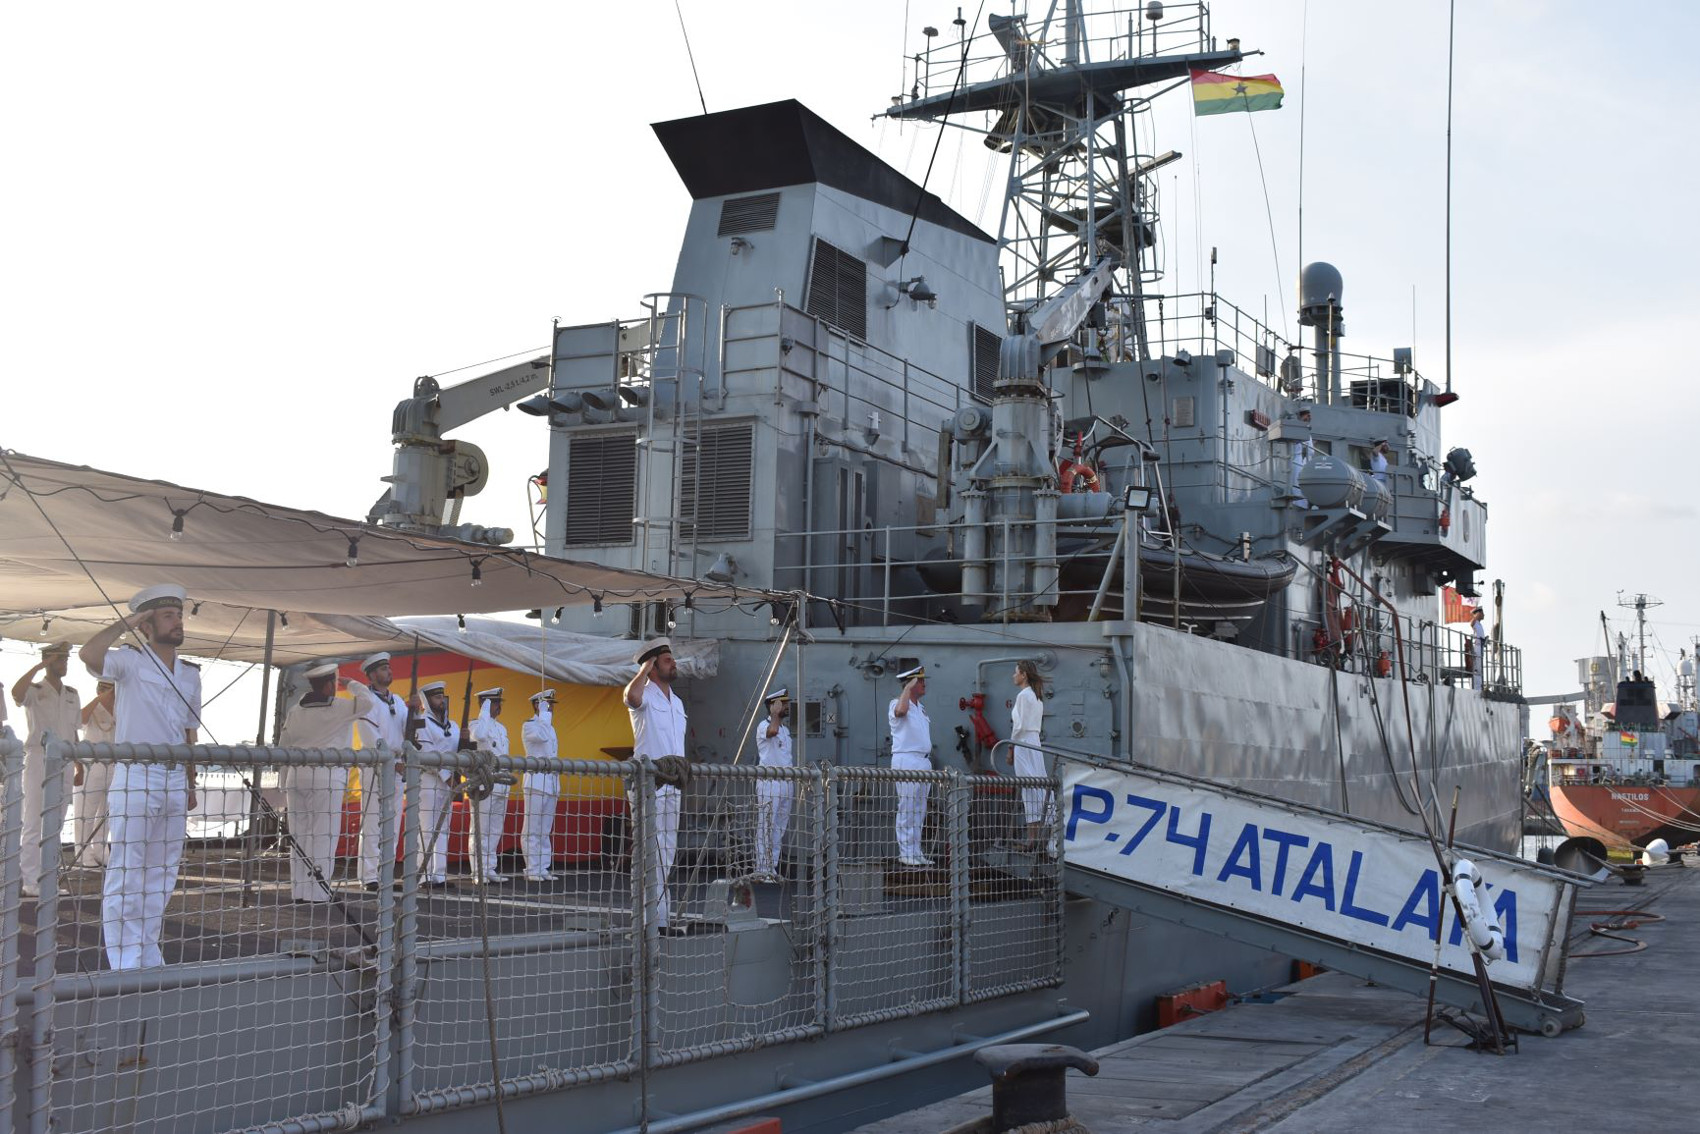 The patrol boat “Atalaya” cooperates with the Ghana Armed Forces in Tema